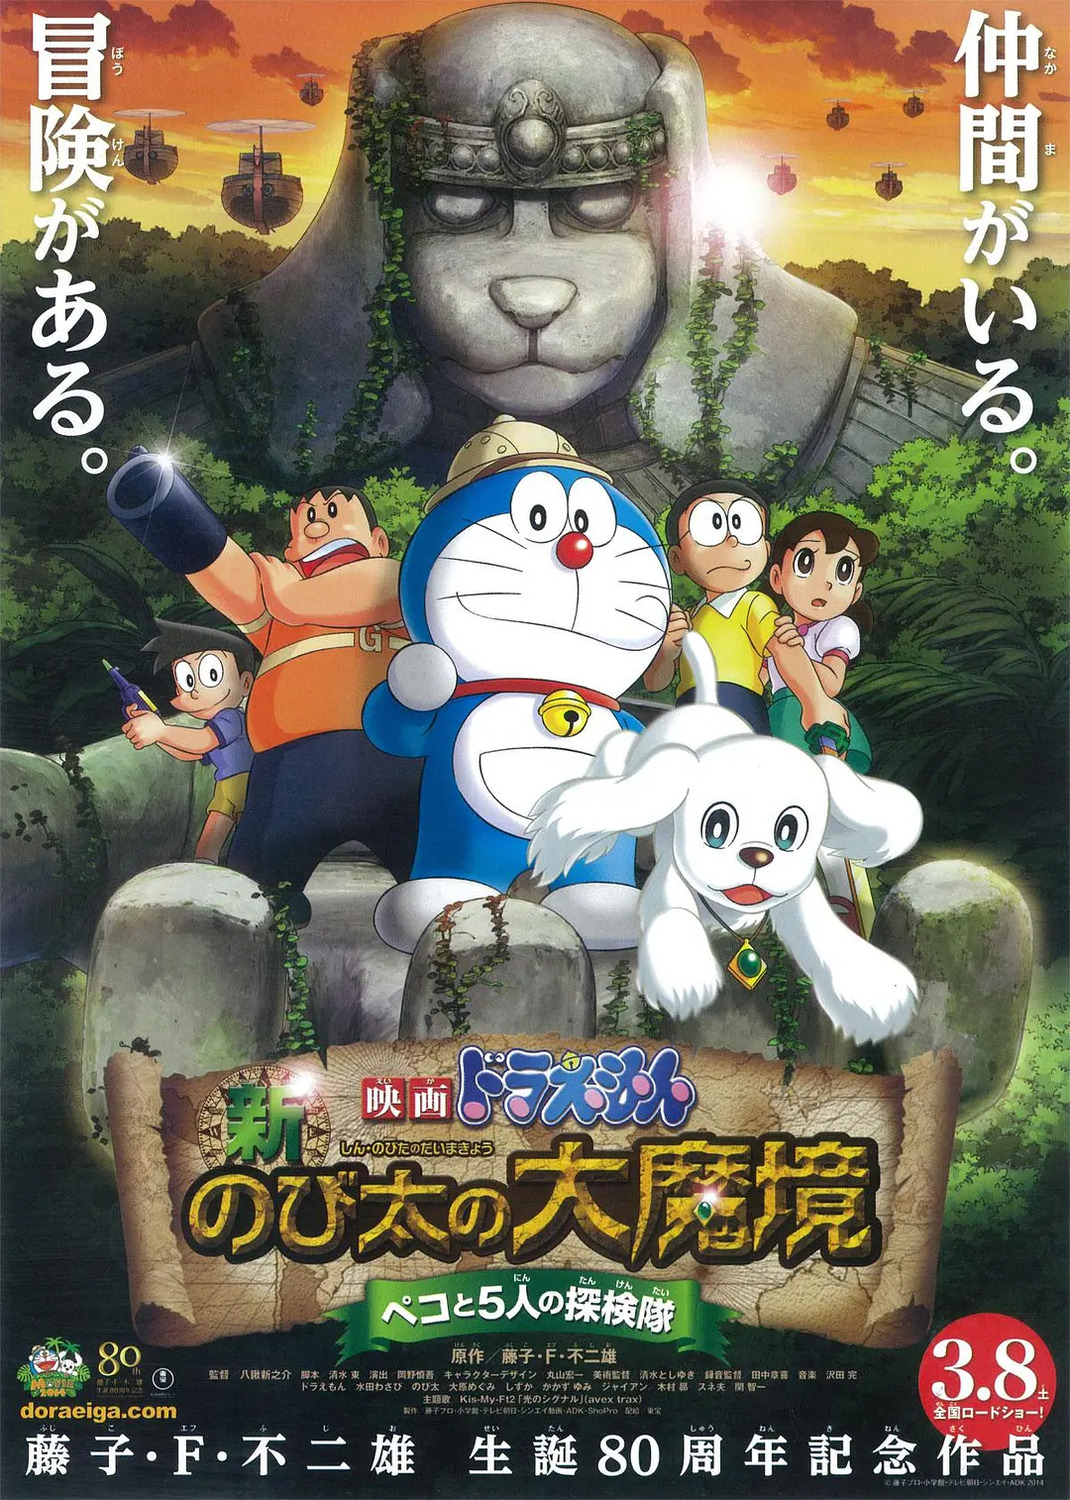 Extra Large Movie Poster Image for Doraemon: New Nobita's Great Demon-Peko and the Exploration Party of Five 